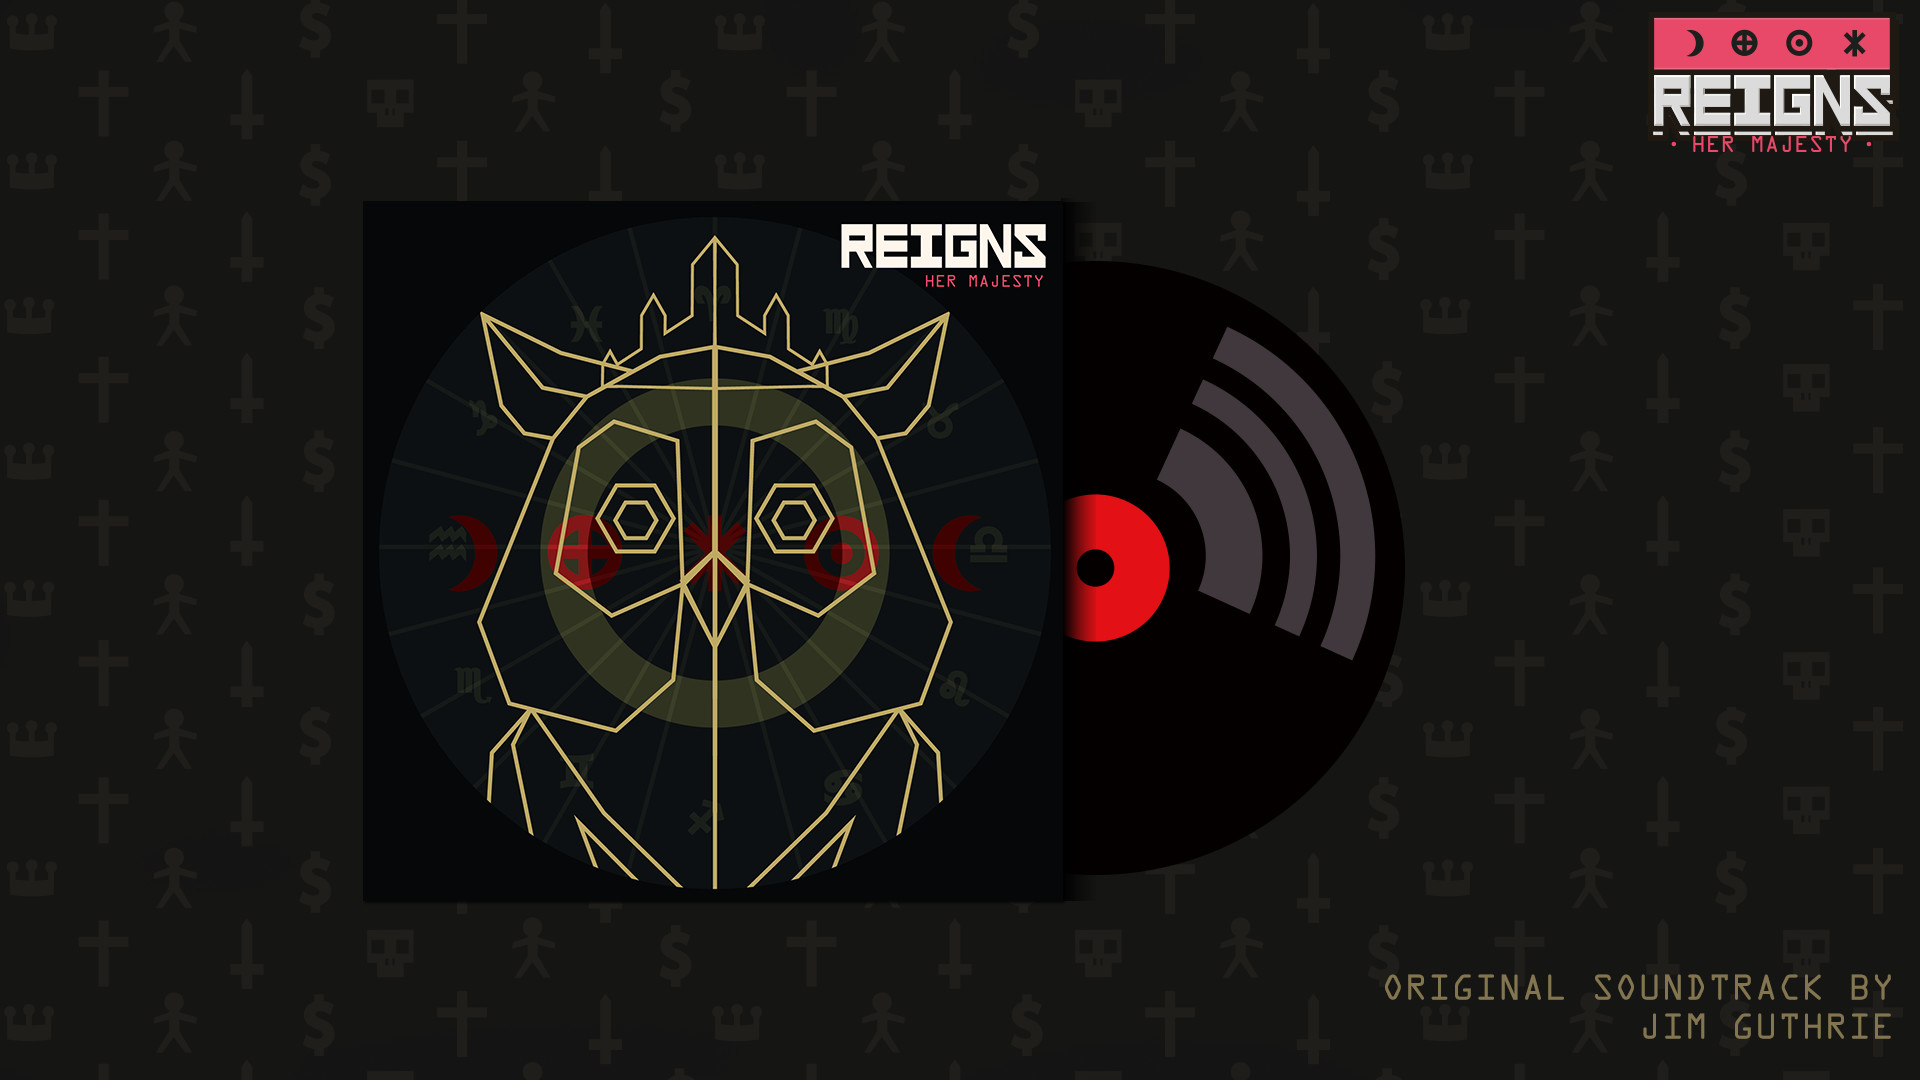 reigns her majesty download